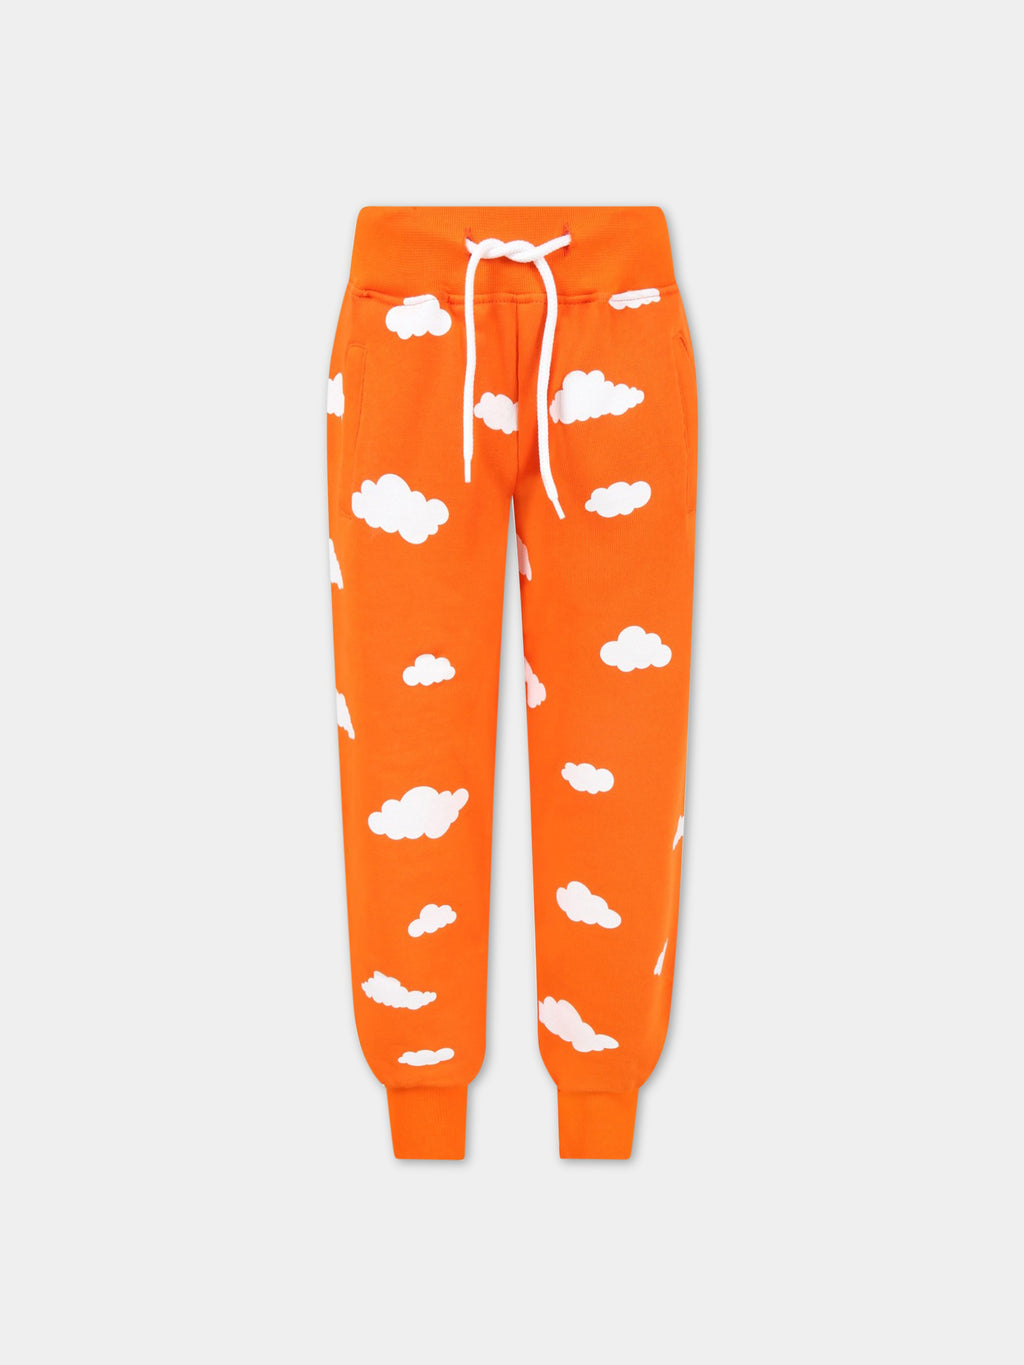 Orange sweatpant for kids with clouds